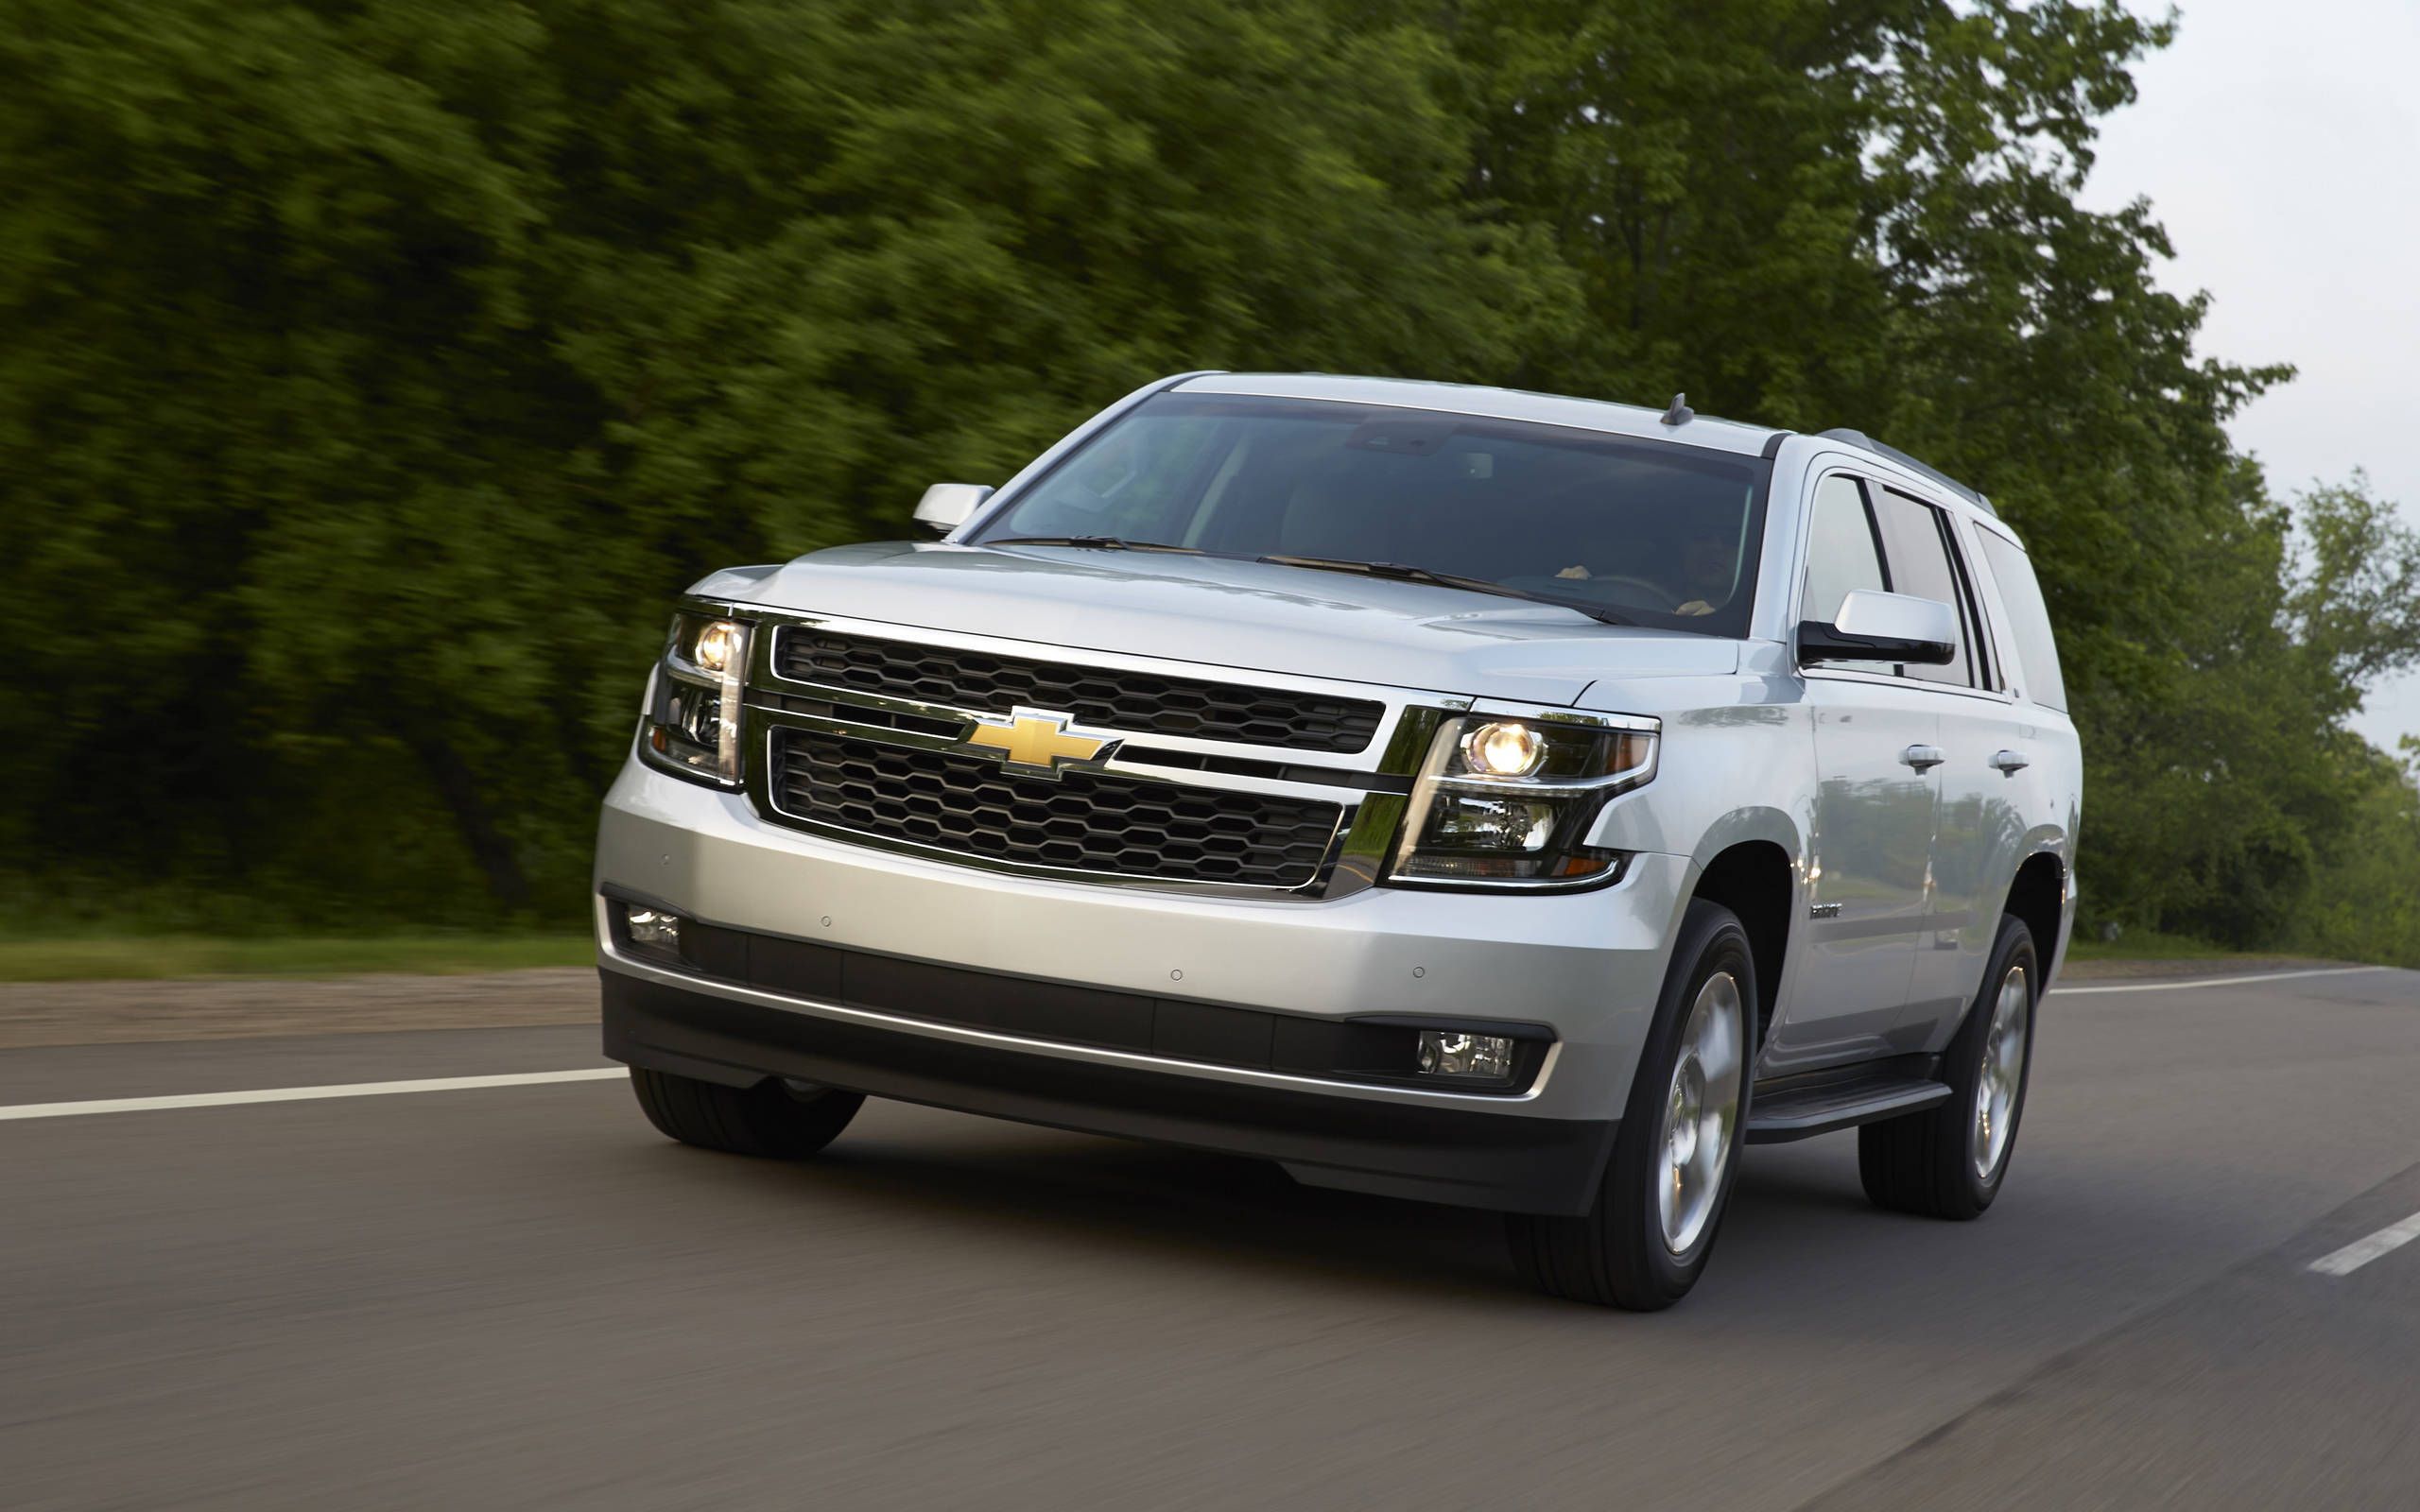 2015 Chevrolet Tahoe LT review notes